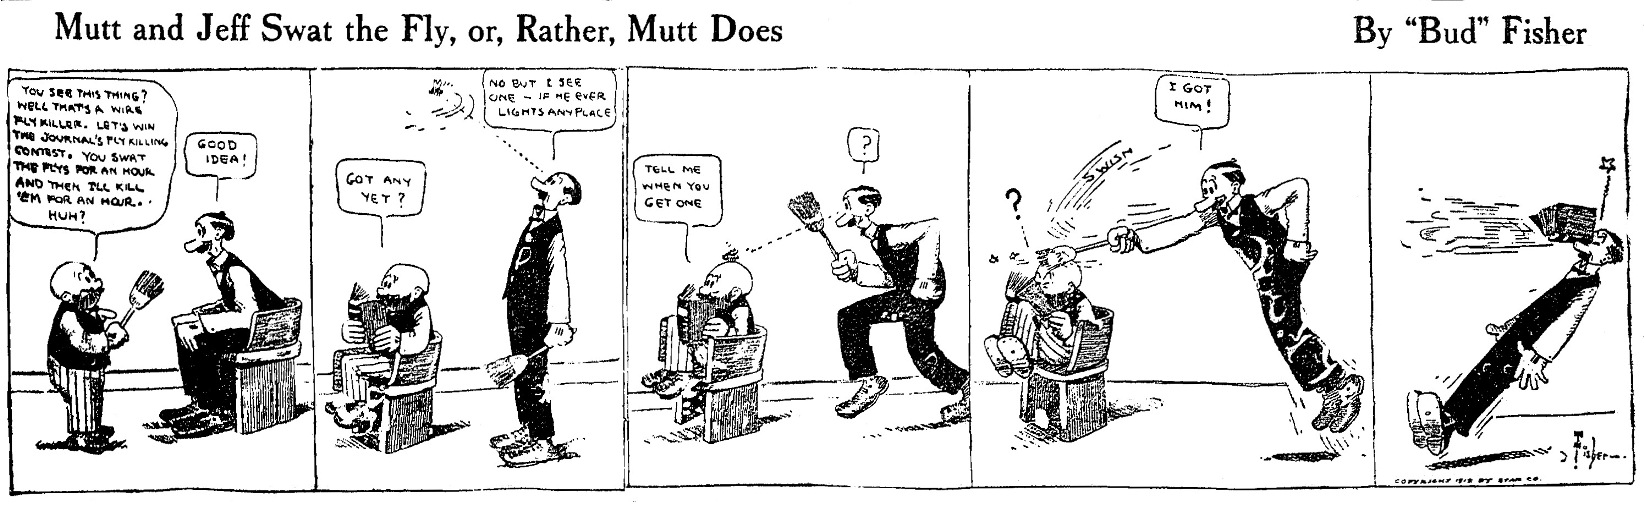 Mutt and Jeff, July 19, 1912 Medford Mail Tribune